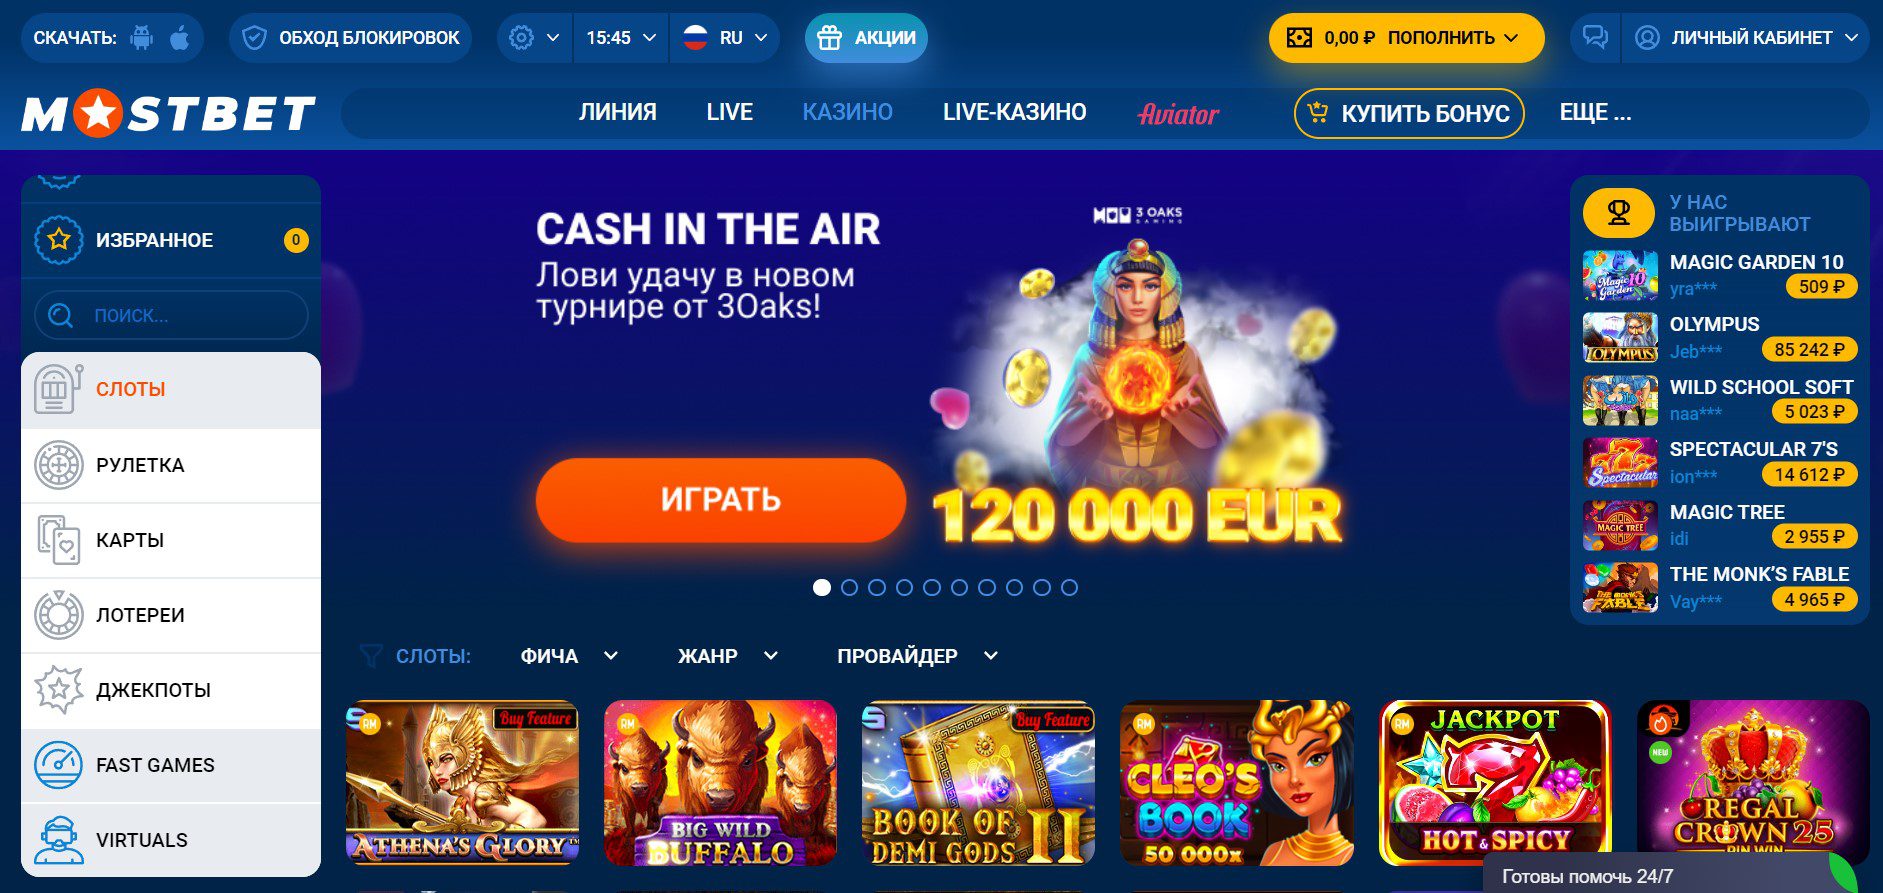 Software and Slot Machines MostBet